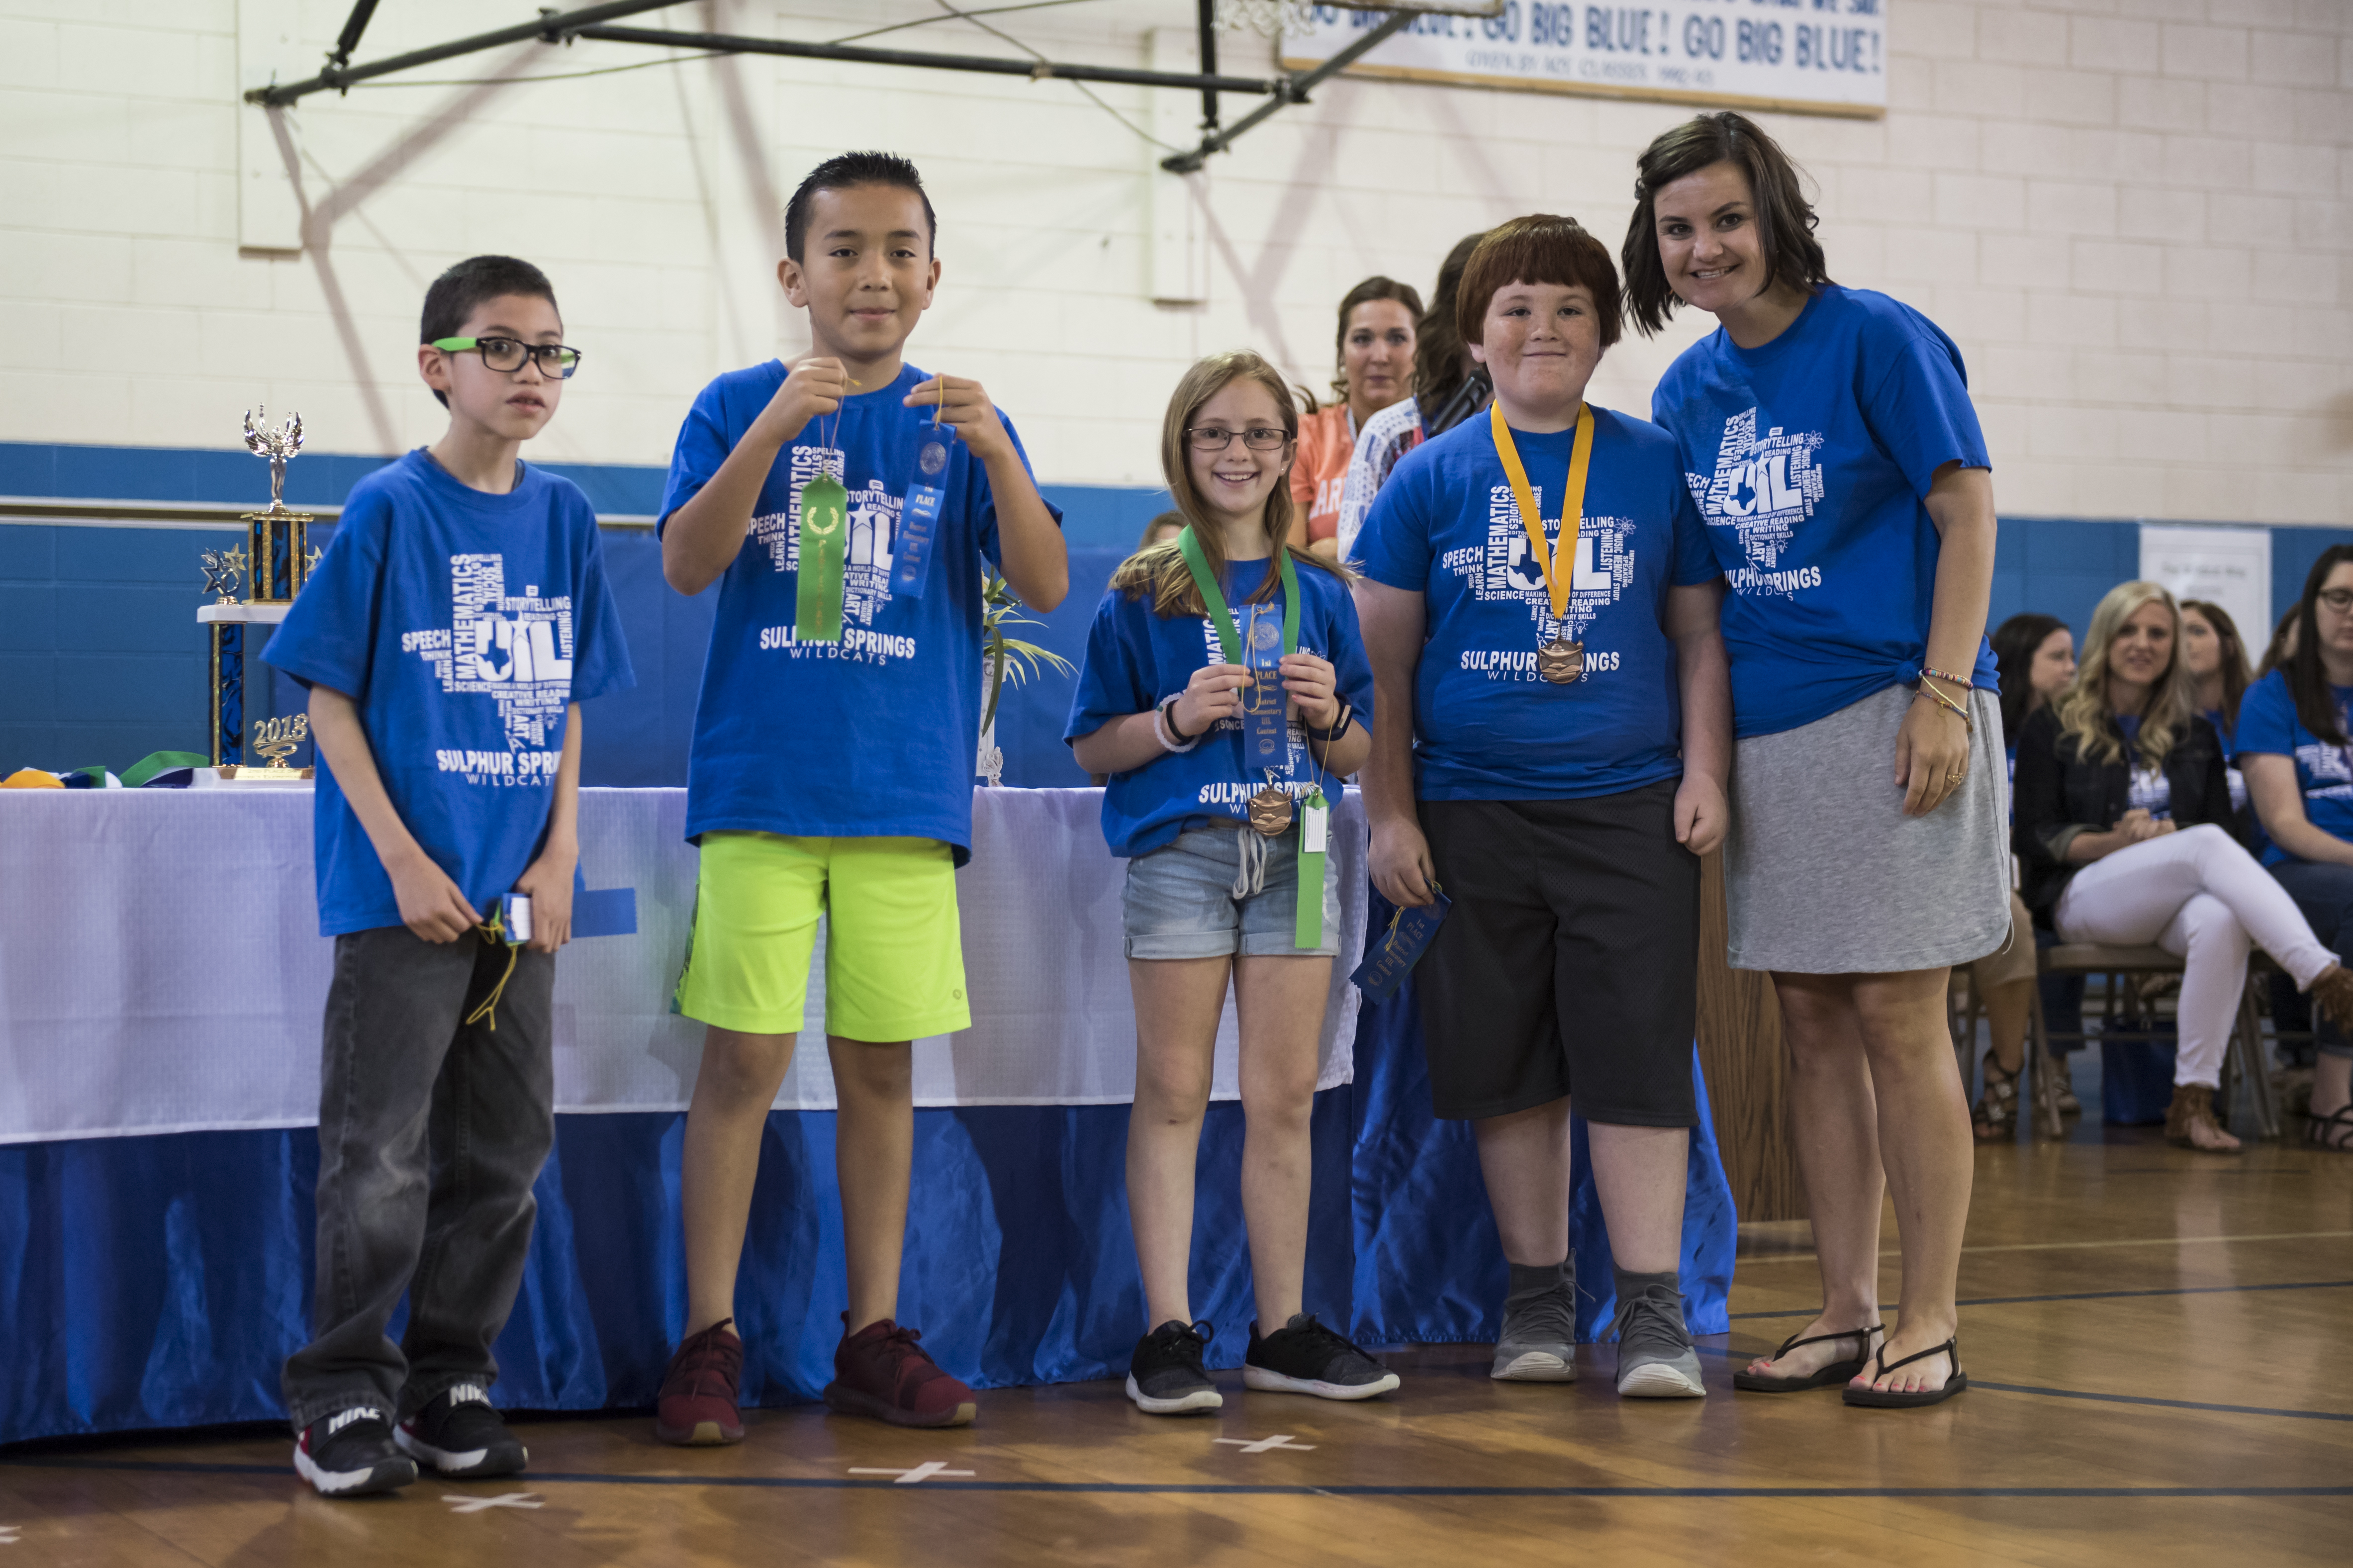 Photos from the Sulphur Springs Elementary School UIL Pep Rally by Mandy Fiock Photography!